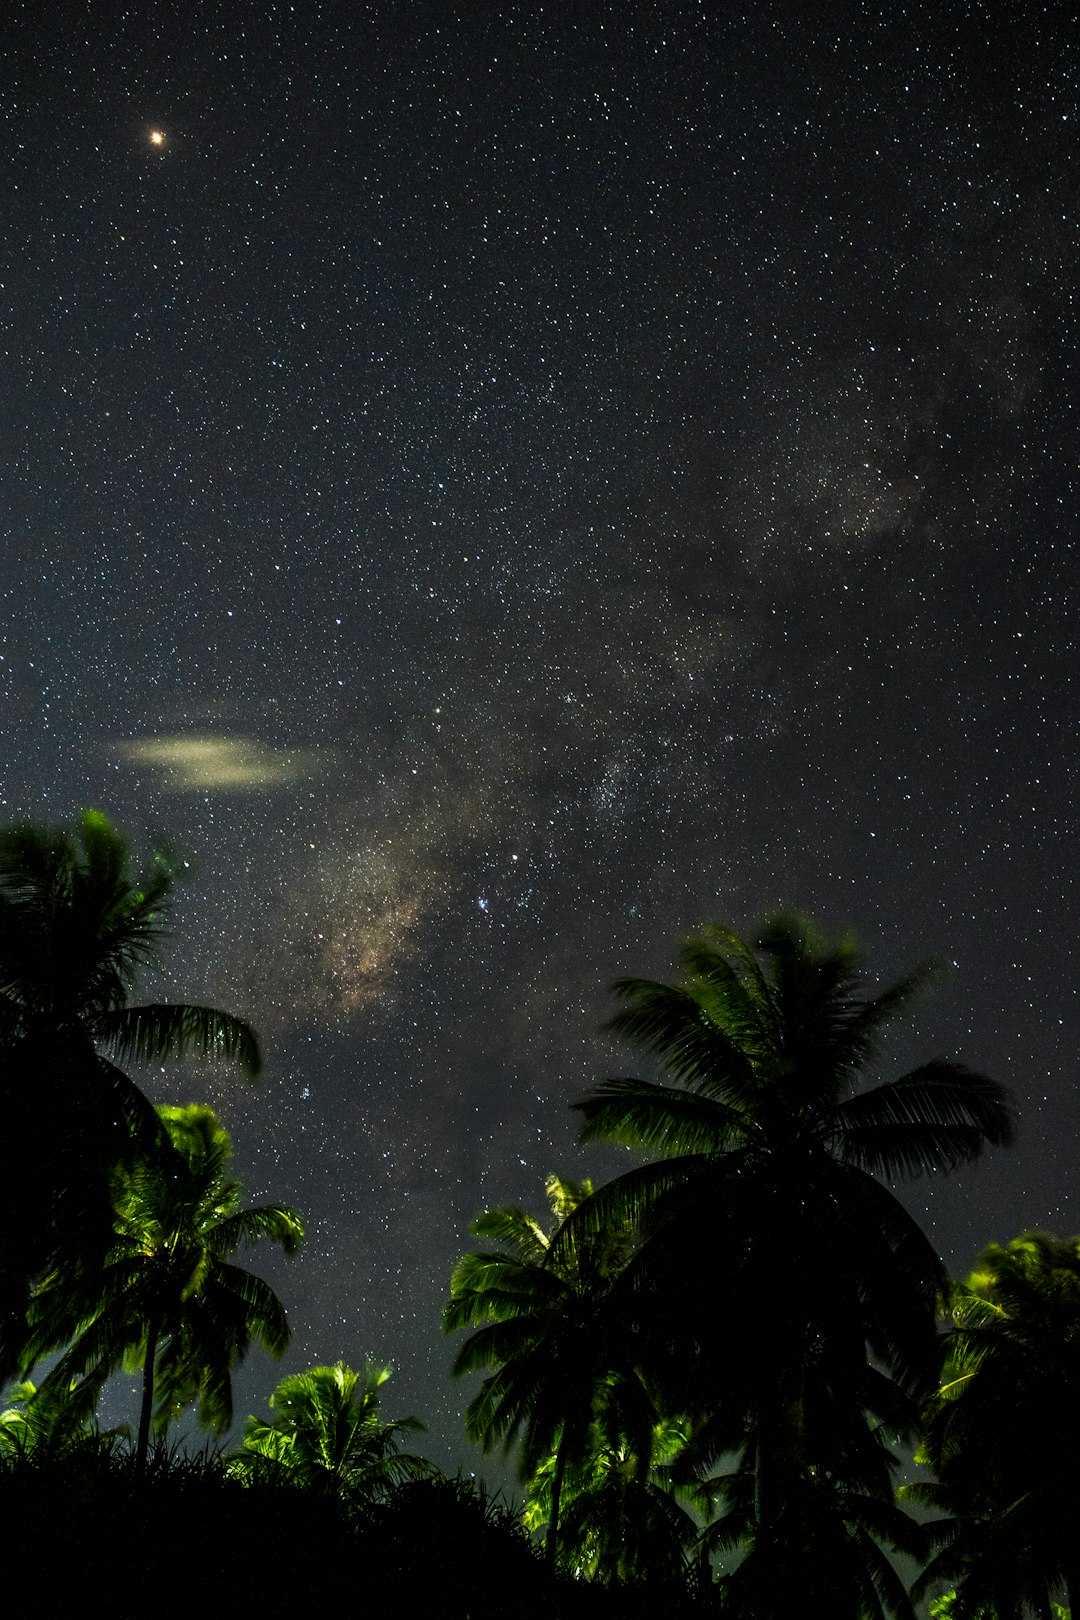 green trees under sky filled with stars